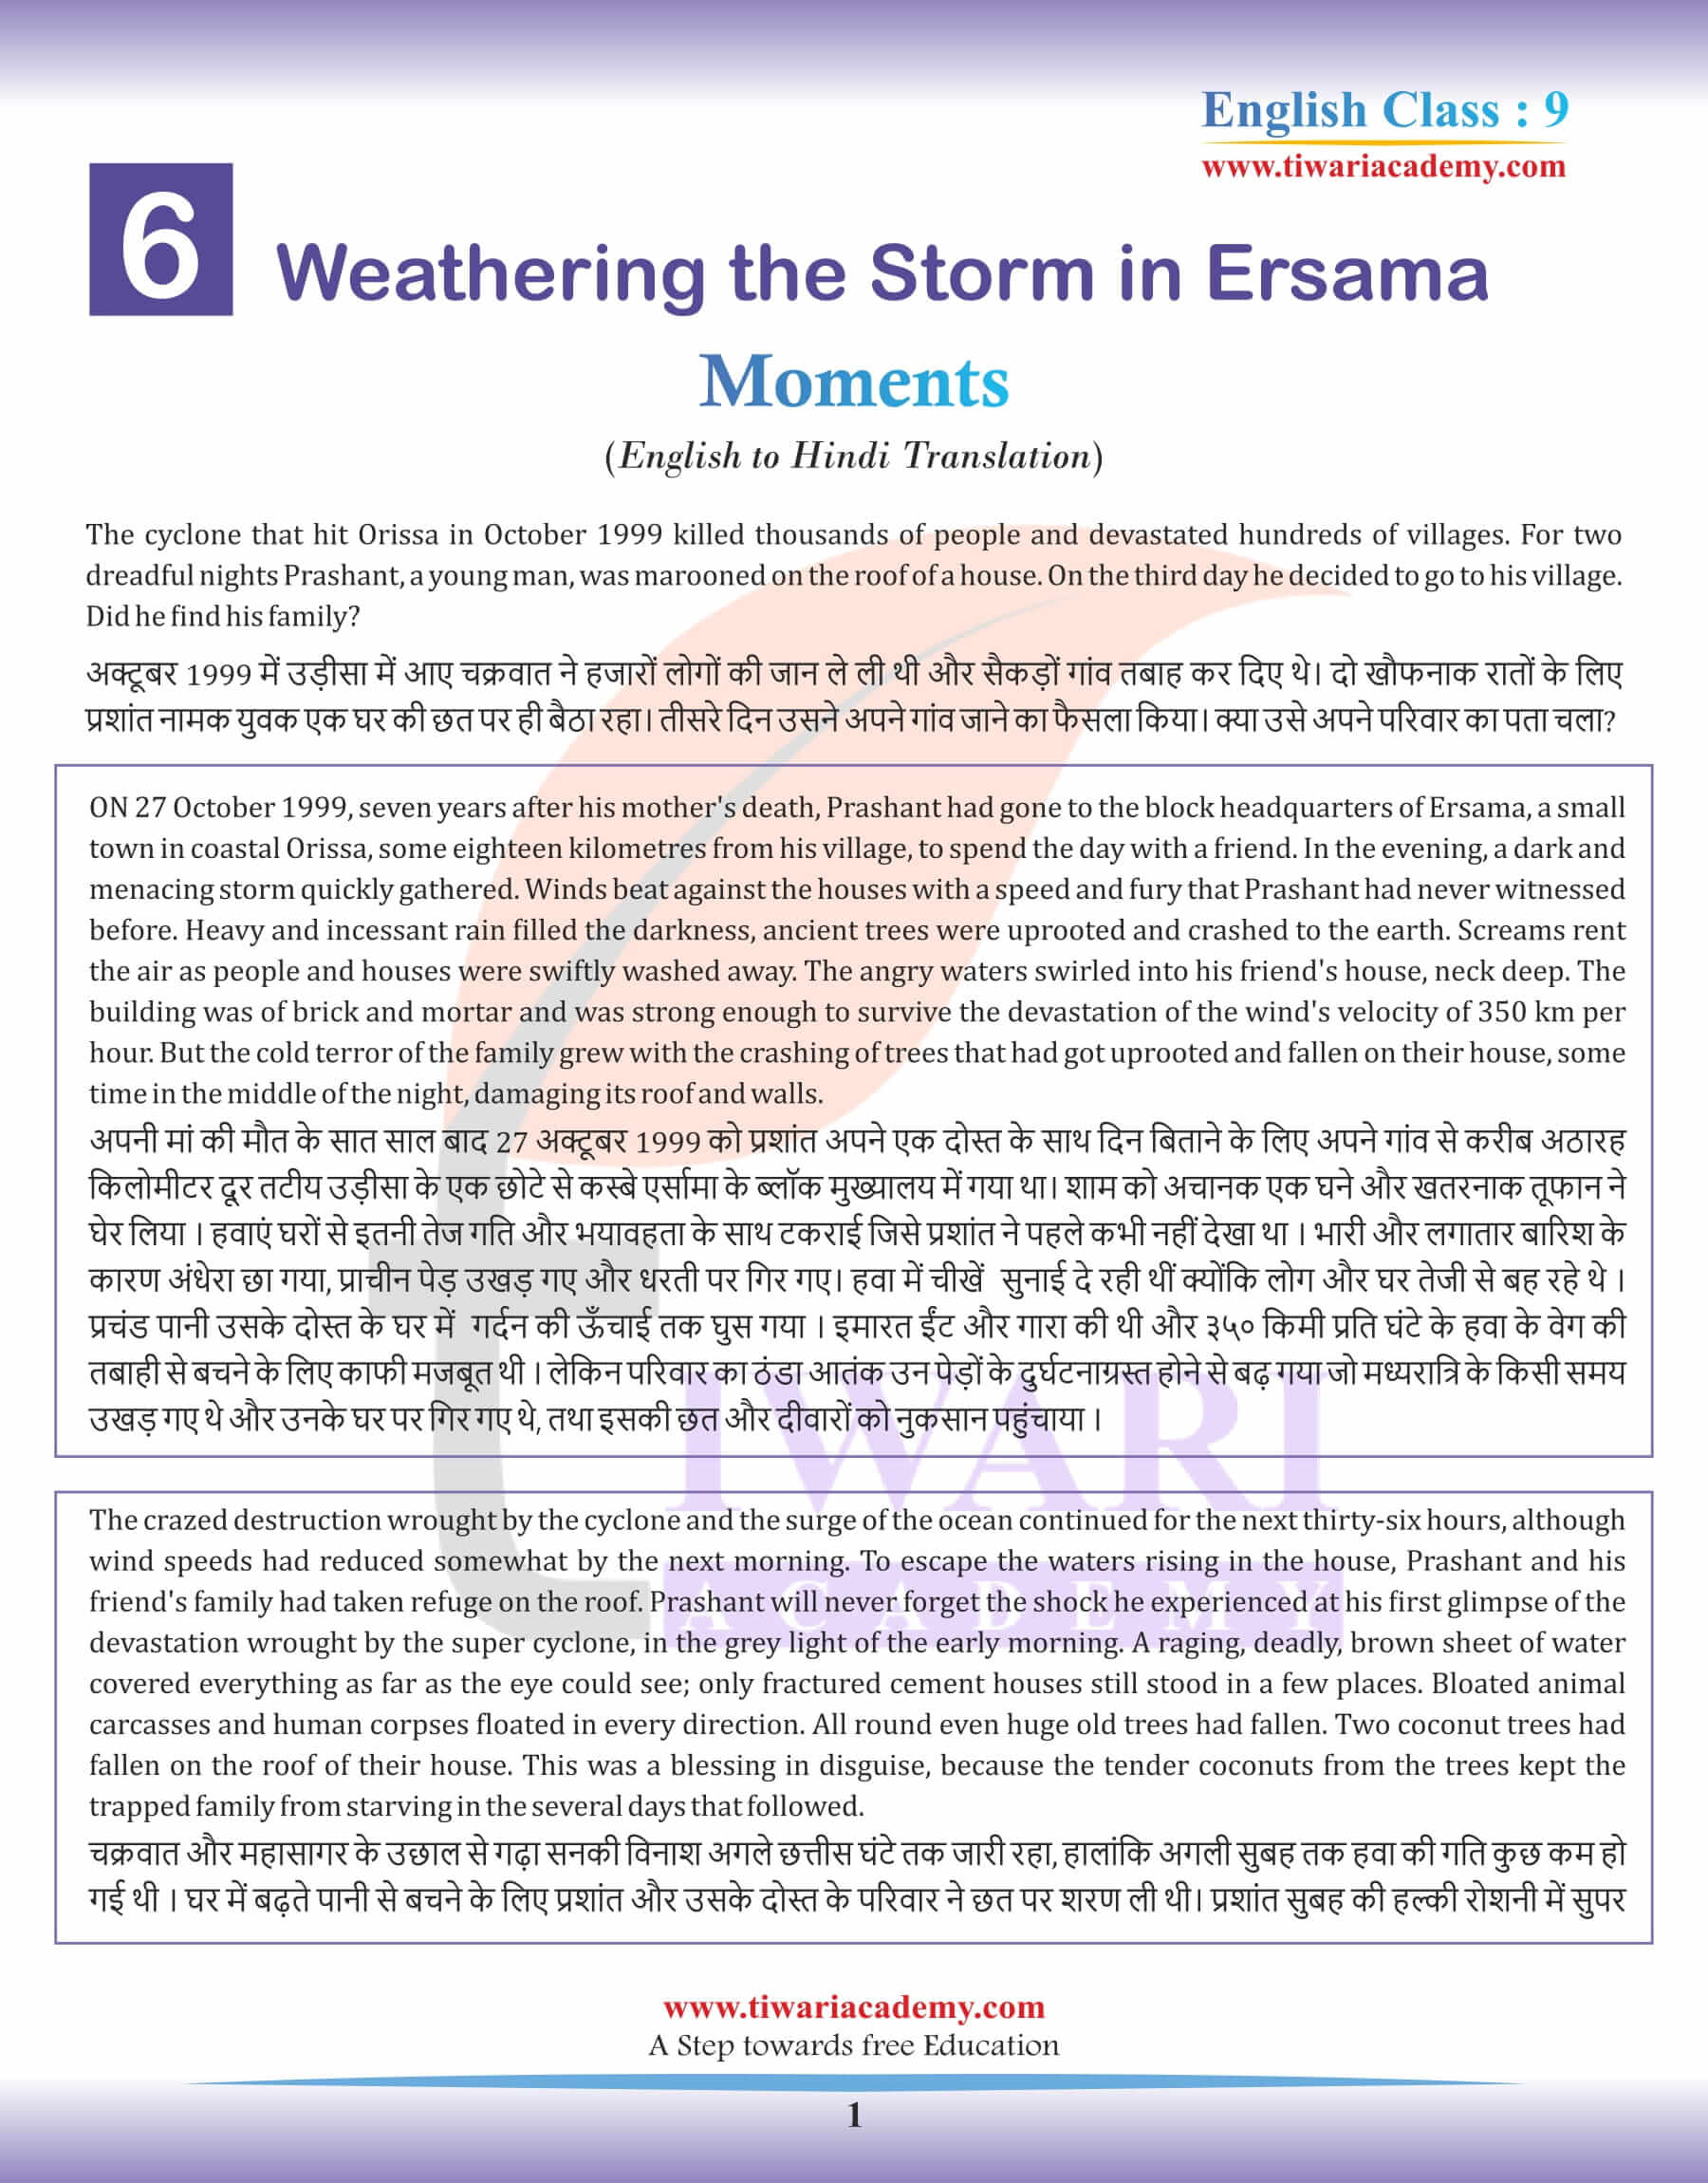 Weathering the Storm in Ersama